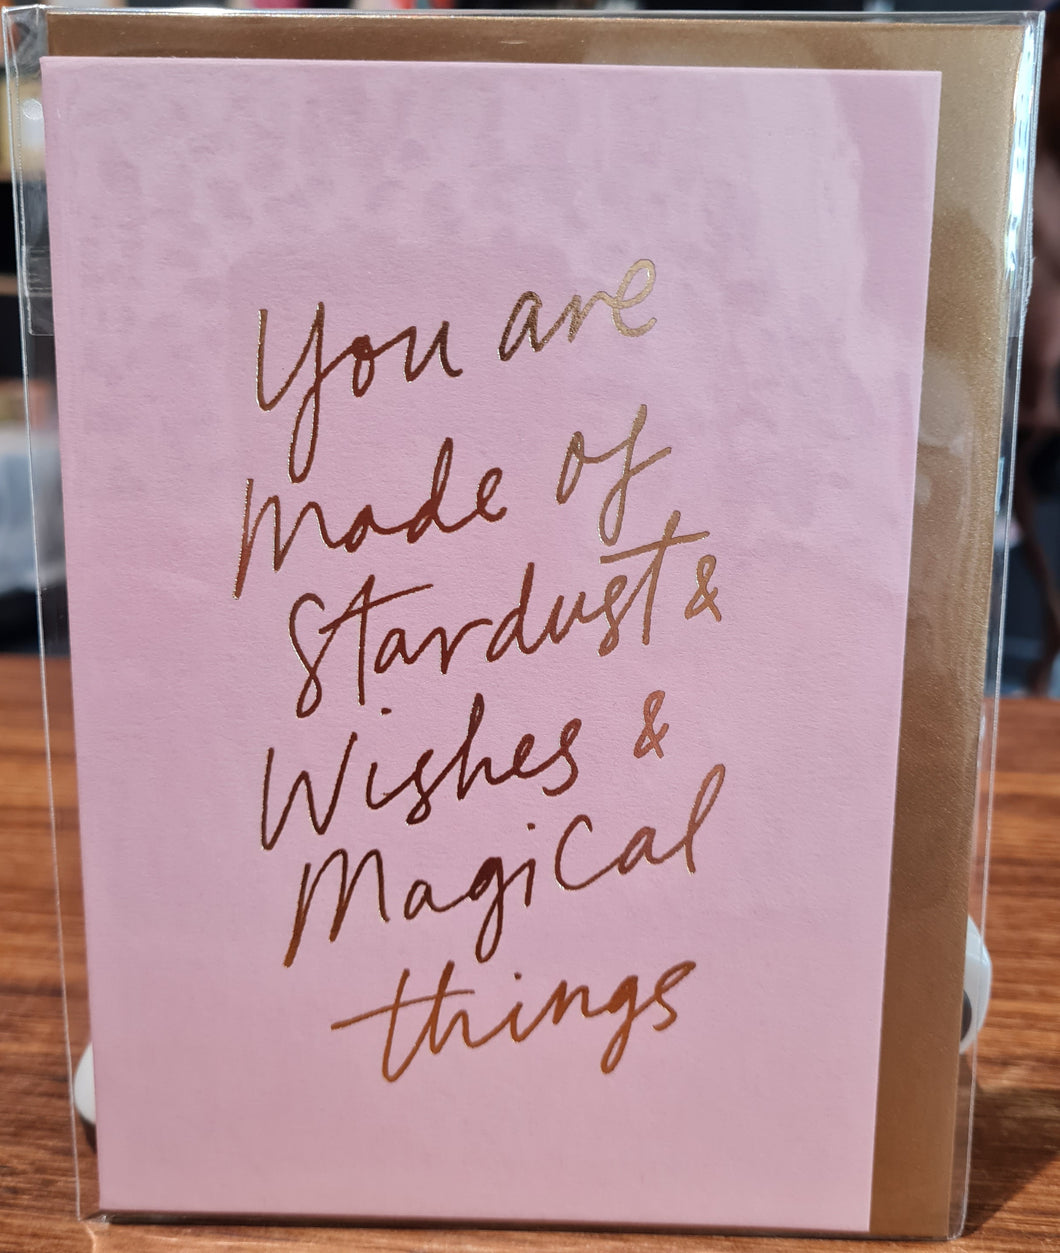 Wishes & Magical Things Card